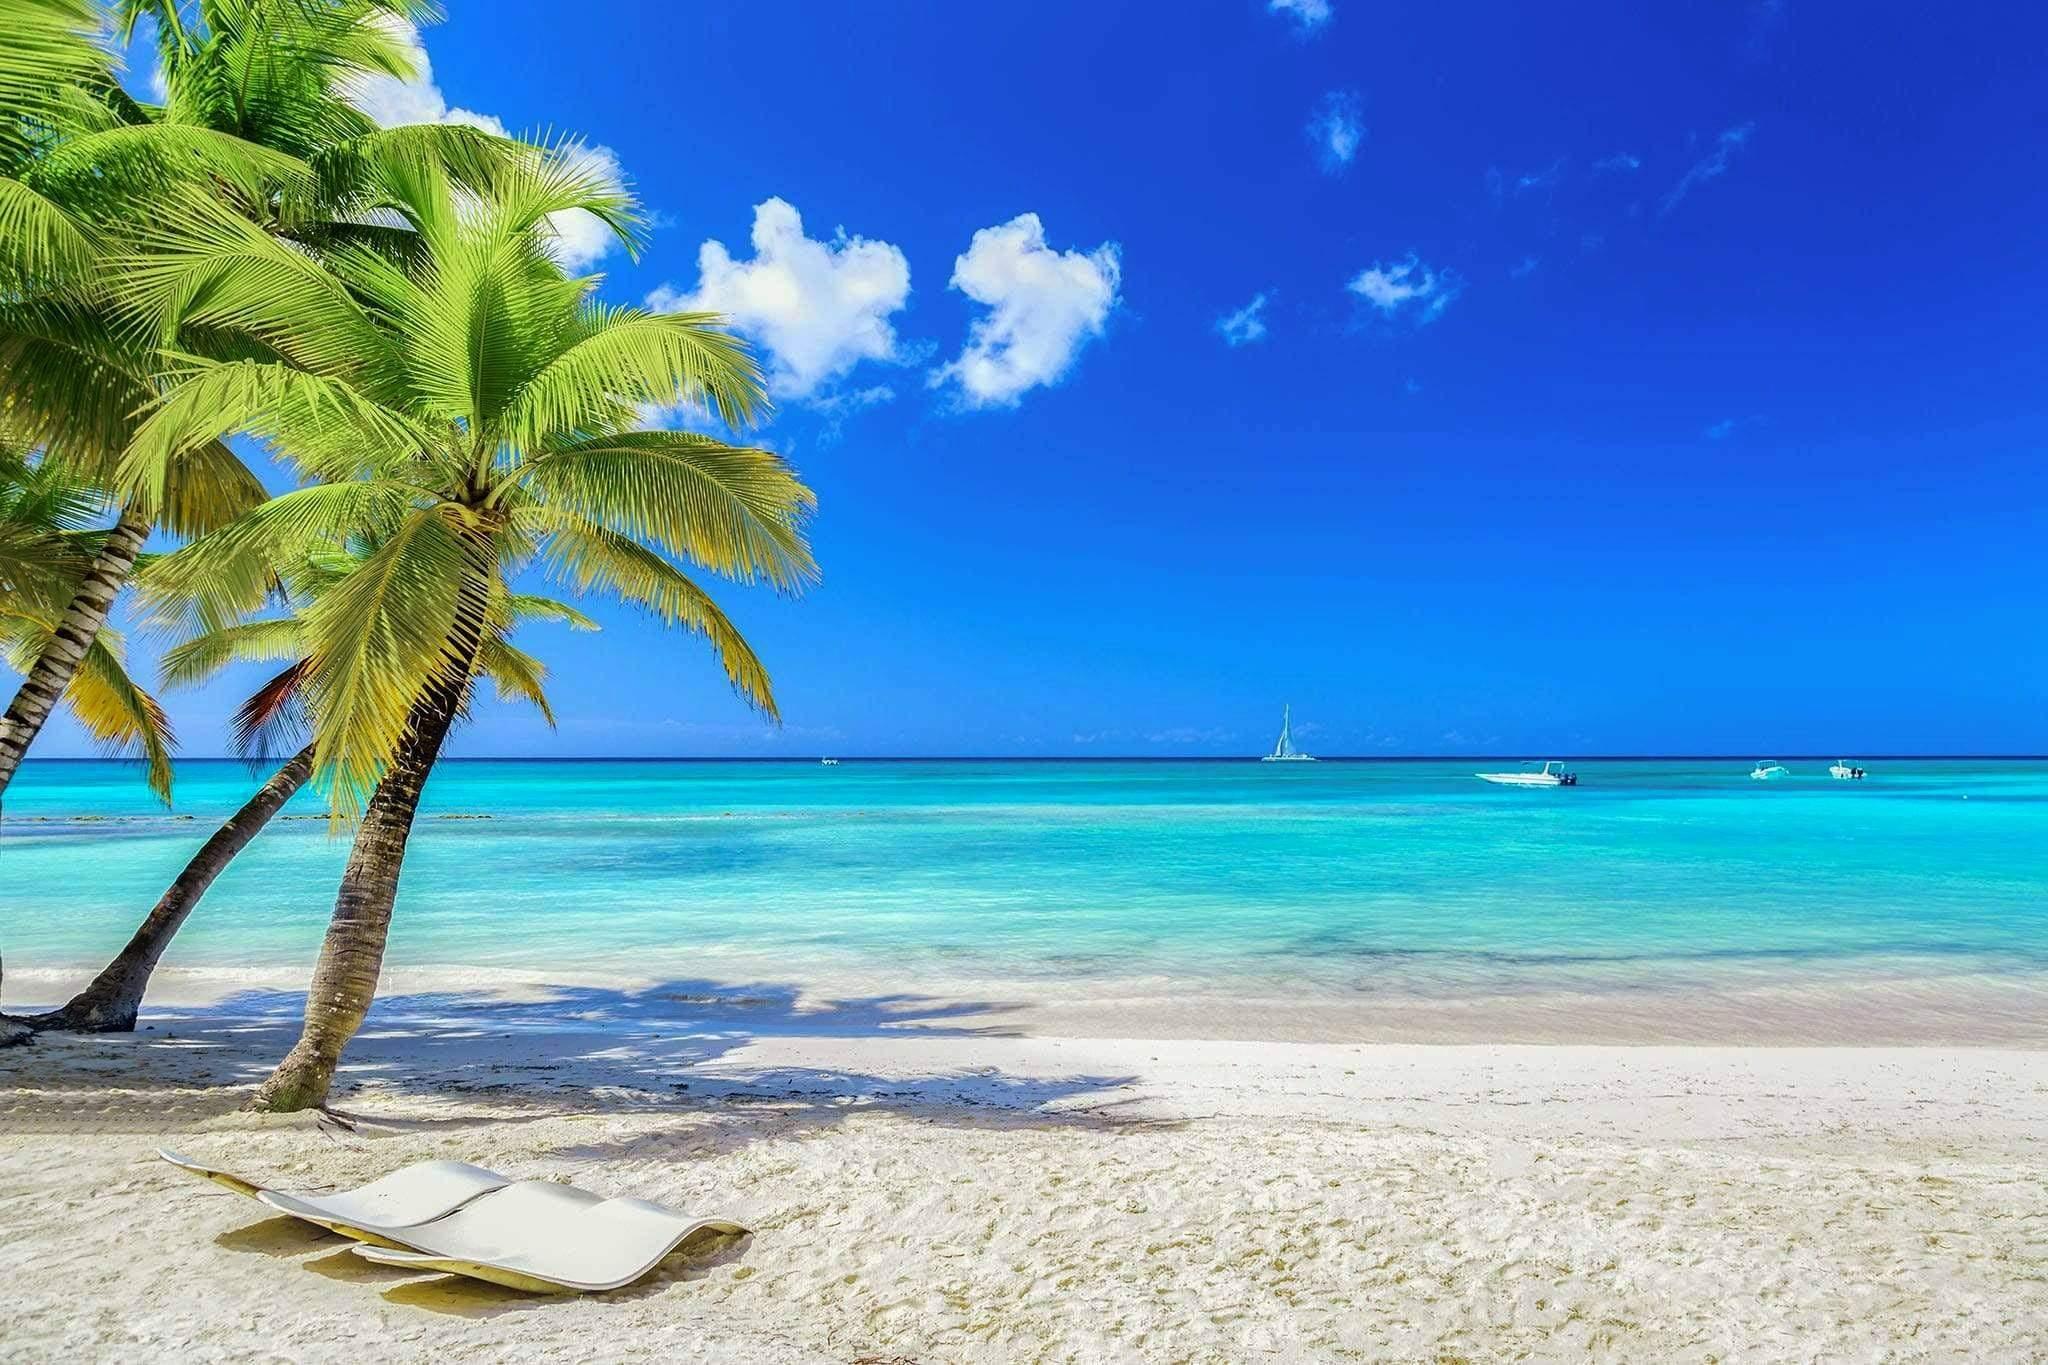 Beach with Palm trees and blue sky